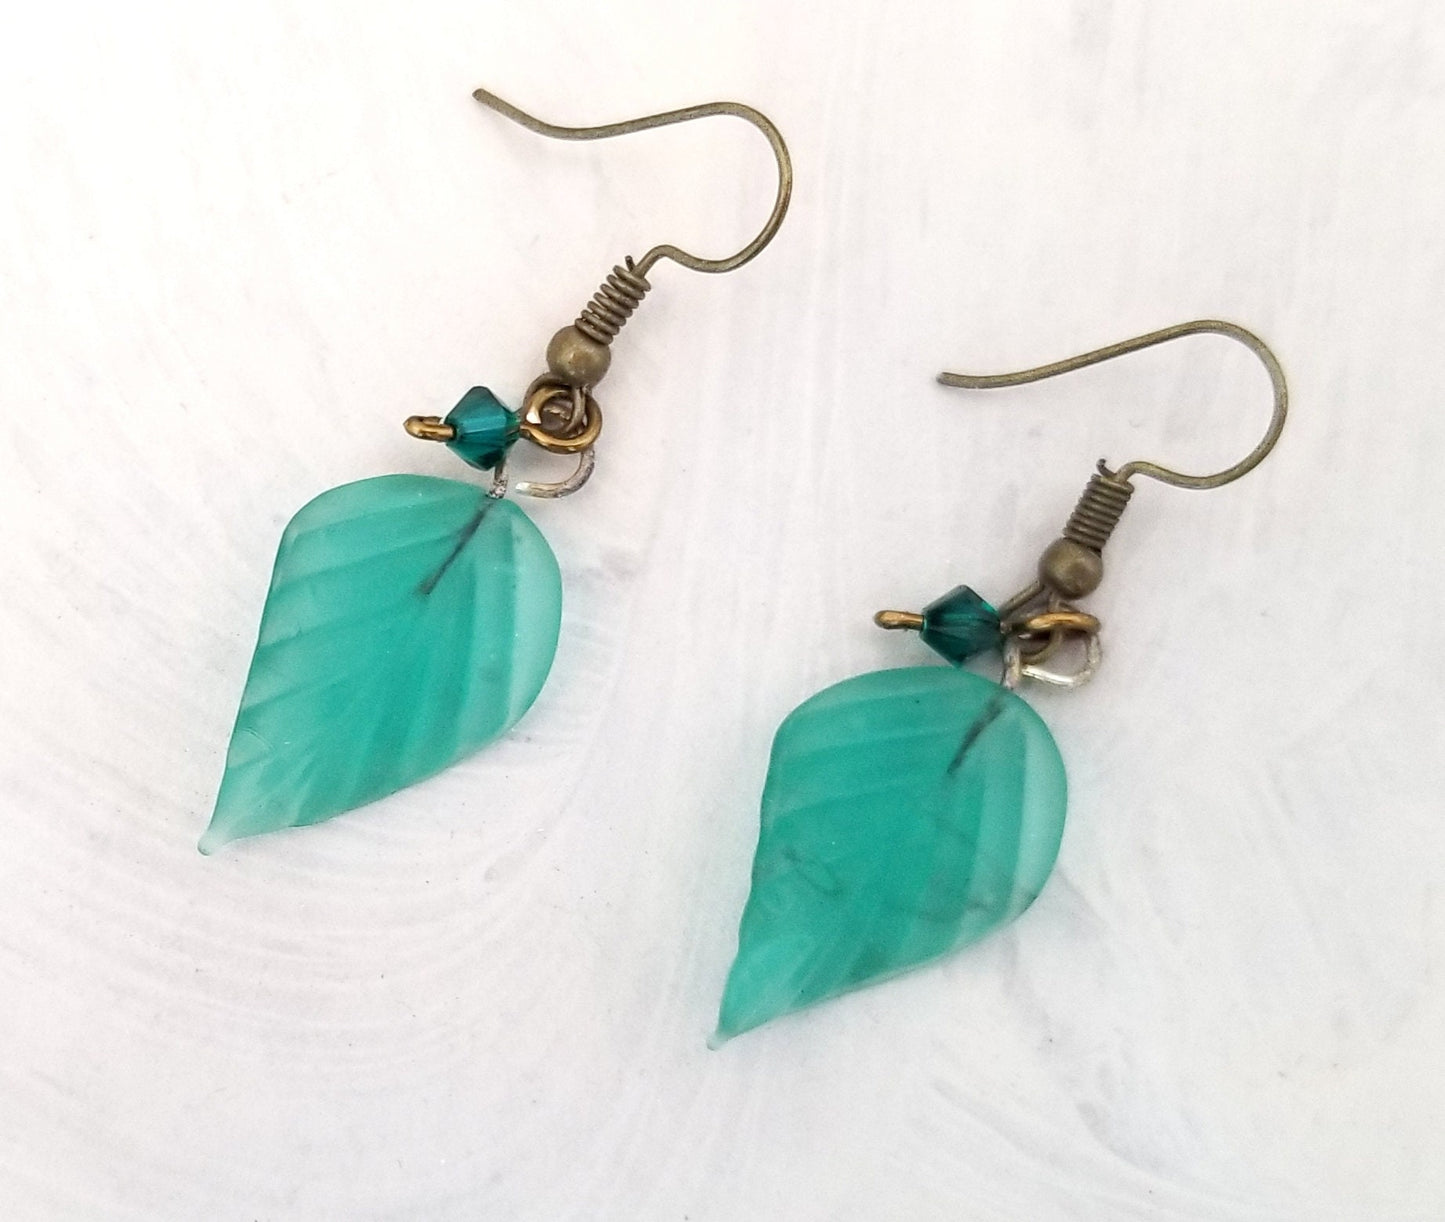 Long Glass Leaf Earrings in Frosted Aqua Sea Blue Green, Wedding, Bridesmaid, Art Nouveau, Renaissance, Forest, Choice of Closure Types